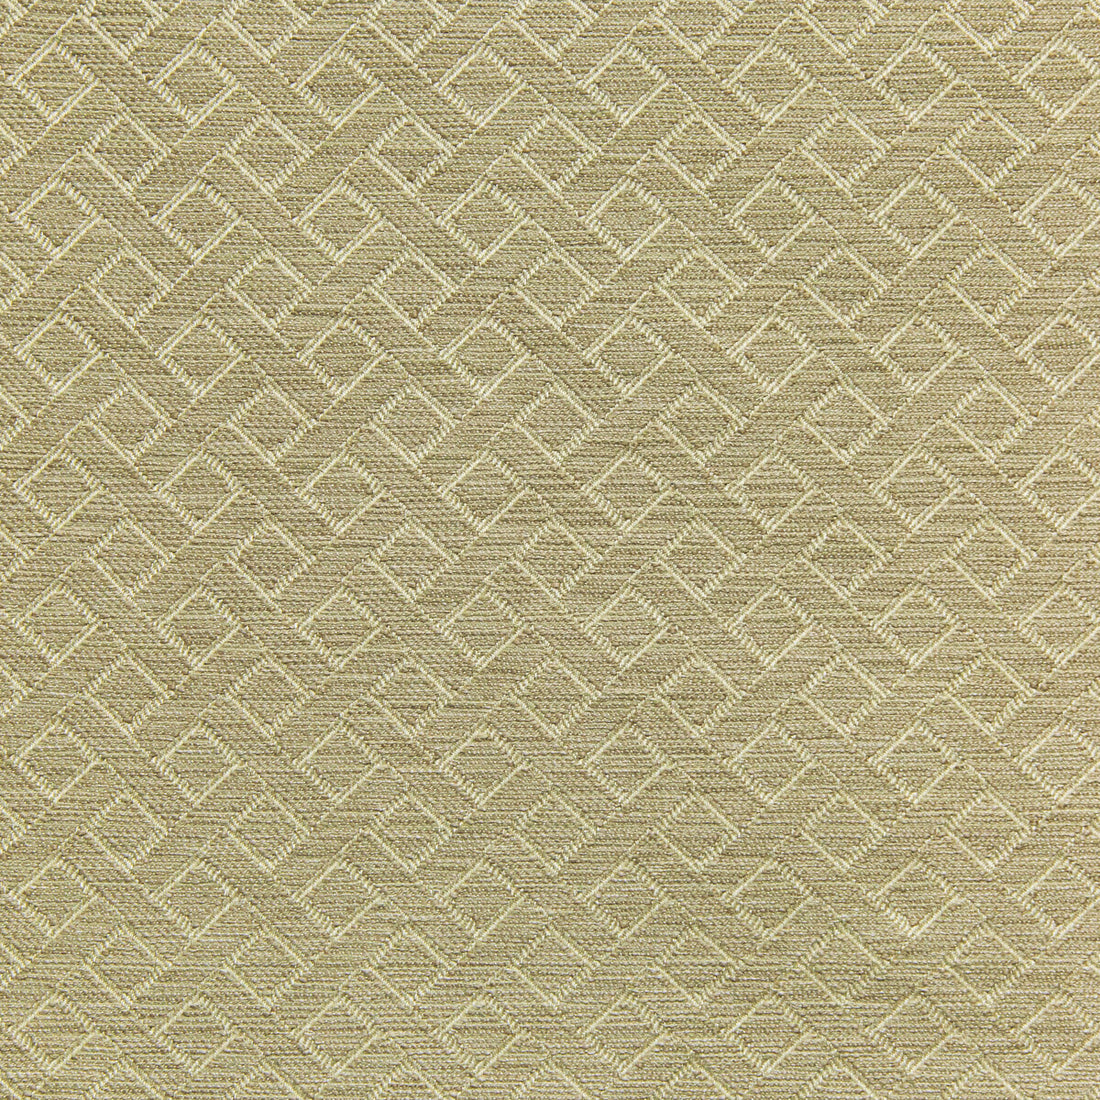 Maldon Weave fabric in fog color - pattern 2020102.11.0 - by Lee Jofa in the Linford Weaves collection